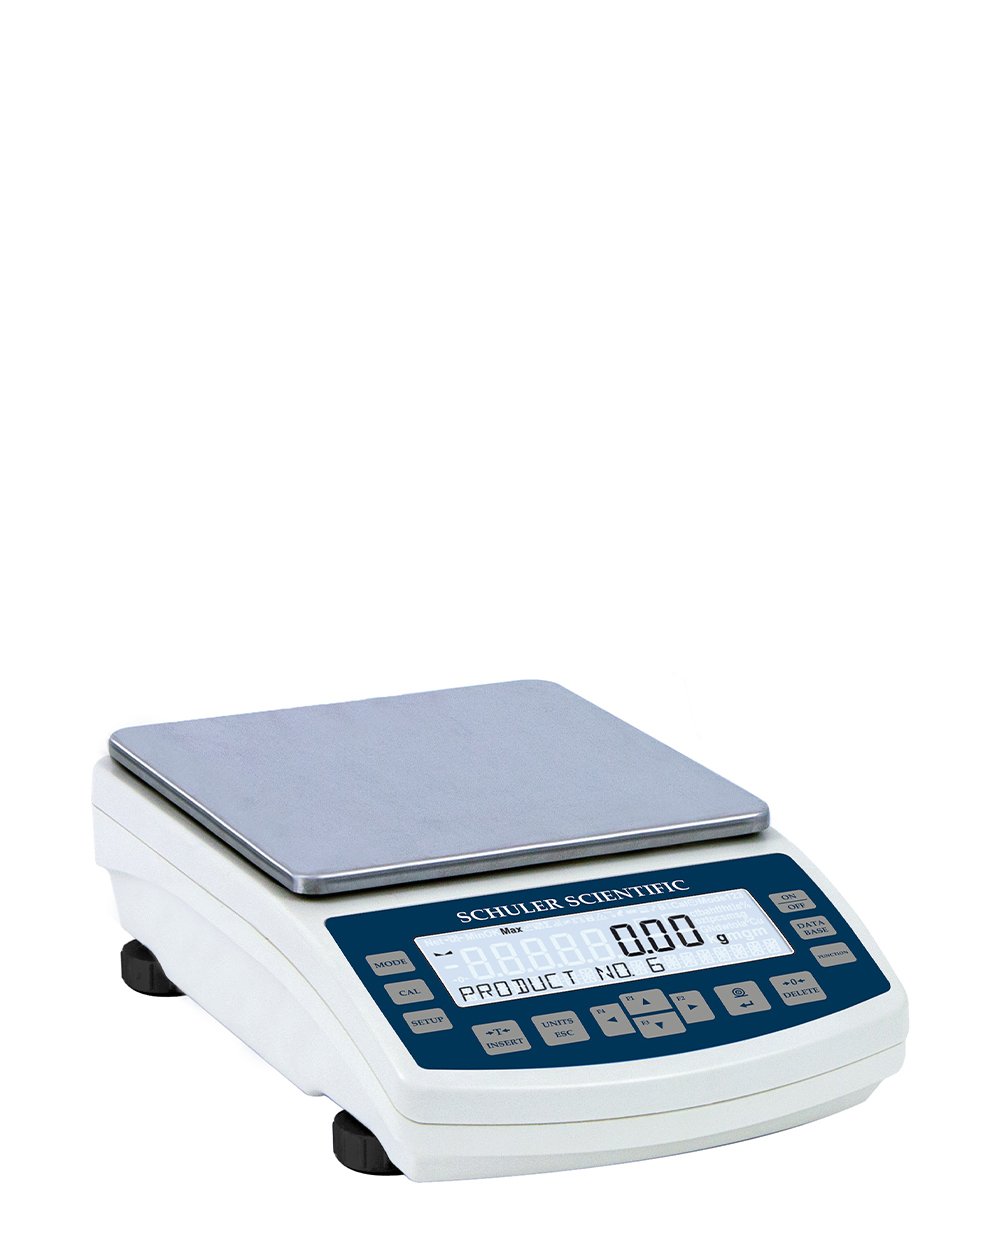 PRECISION CANNABIS SCALE ELECTRONIC 4-AA BATTERIES INCLUDED CAP. 600 GRAMS